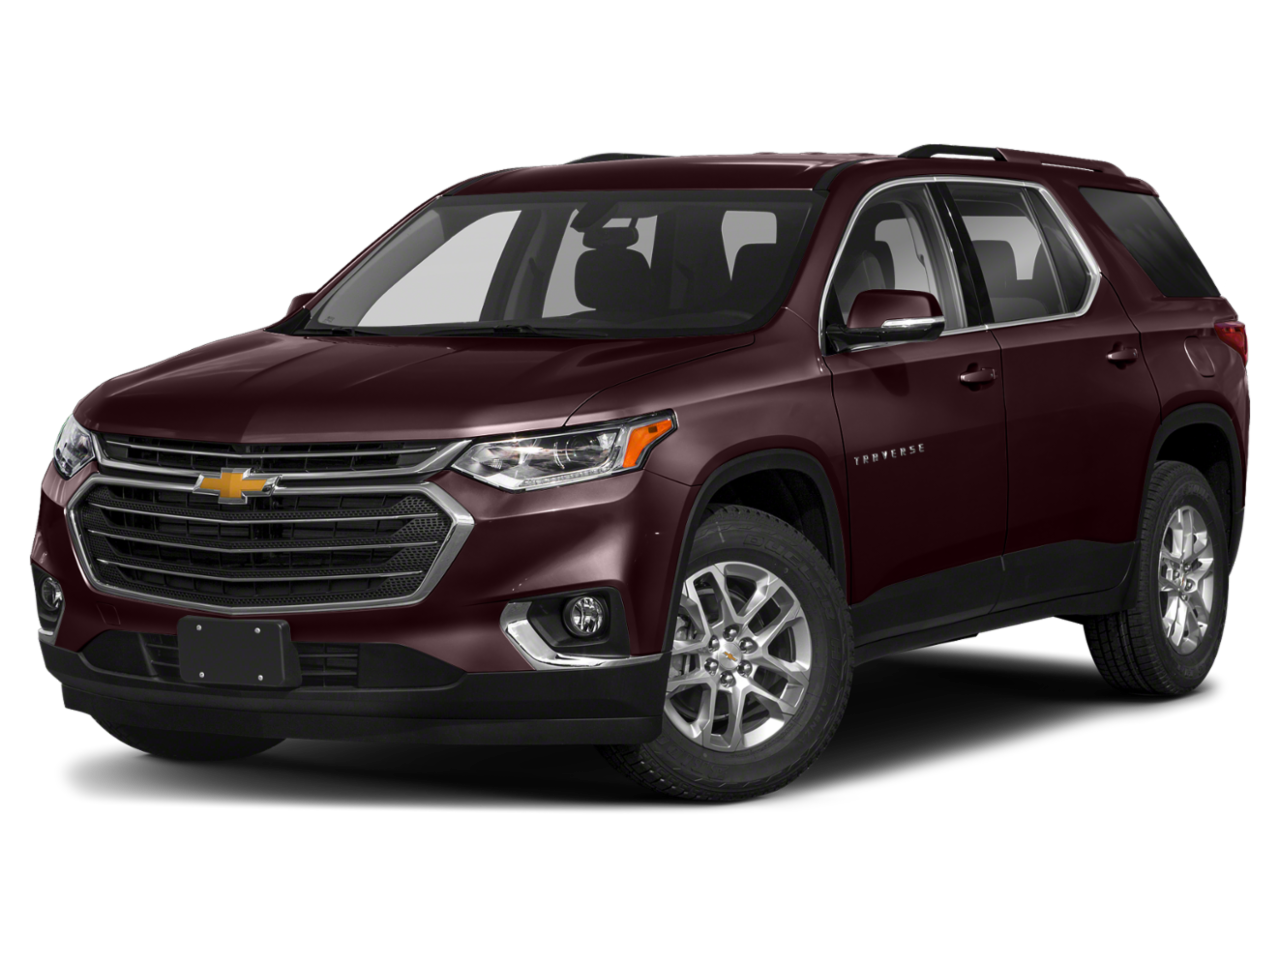 Traditions Chevrolet is a EAST BERNARD Chevrolet dealer and a new car